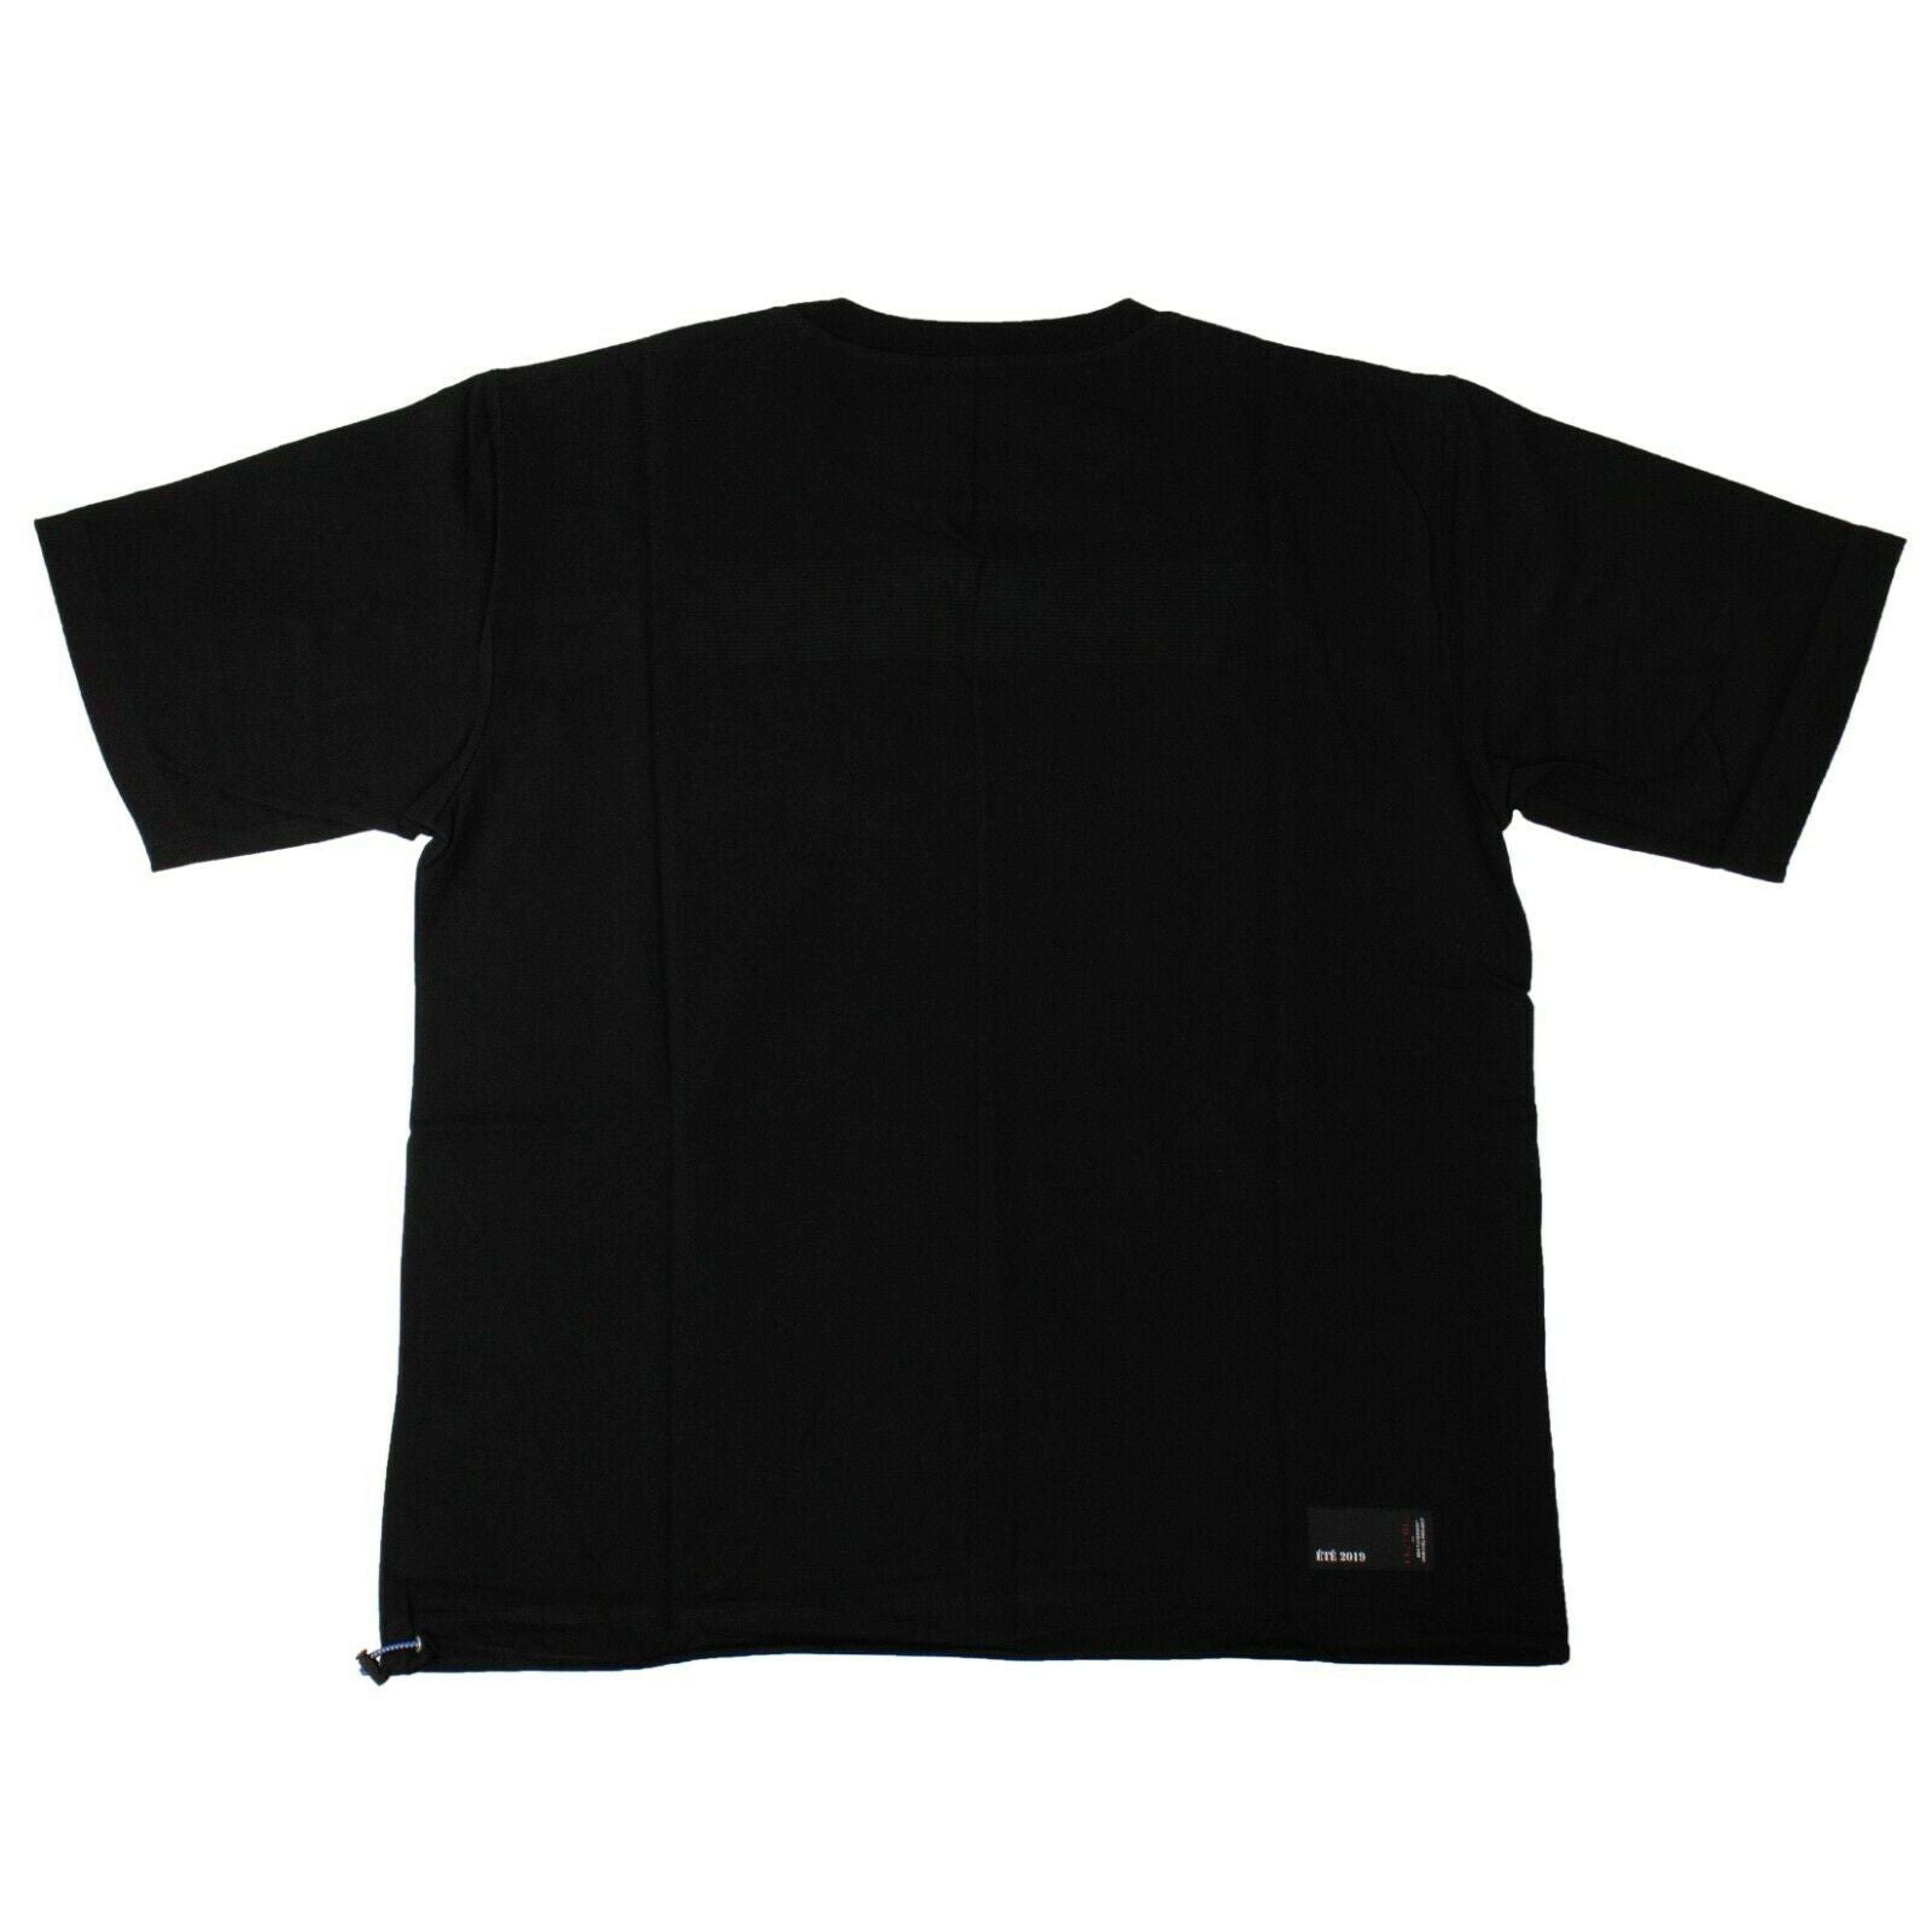 Alternate View 1 of Unravel Project Relaxed Fit T-Shirt - Black